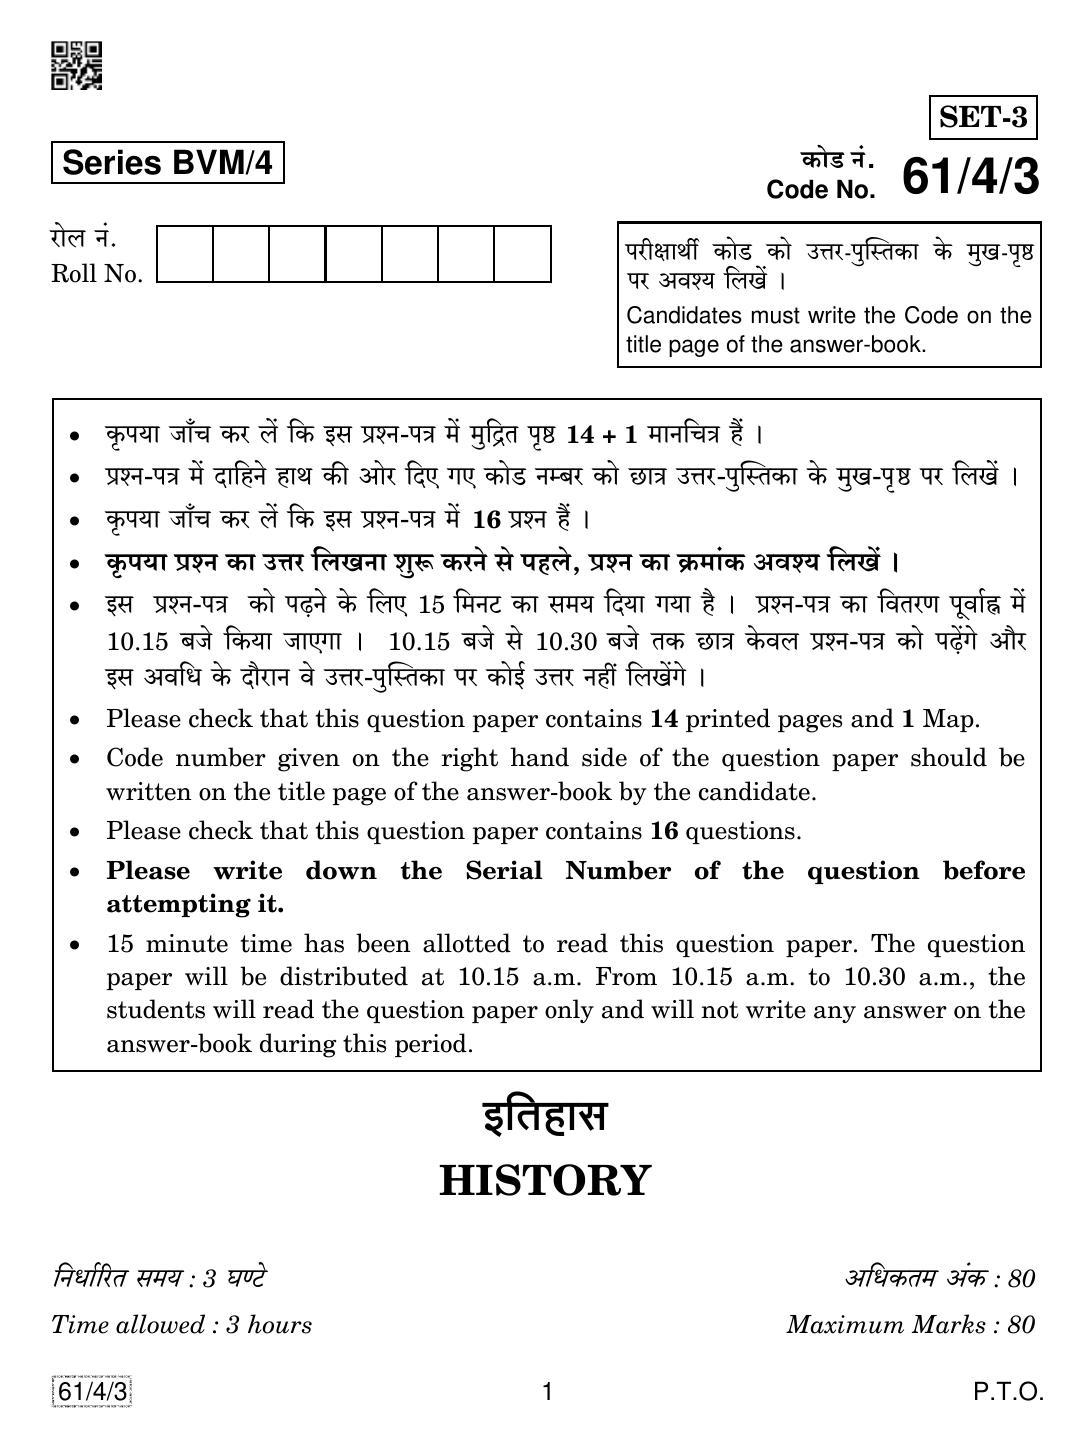 CBSE Class 12 61-4-3 History 2019 Question Paper - Page 1